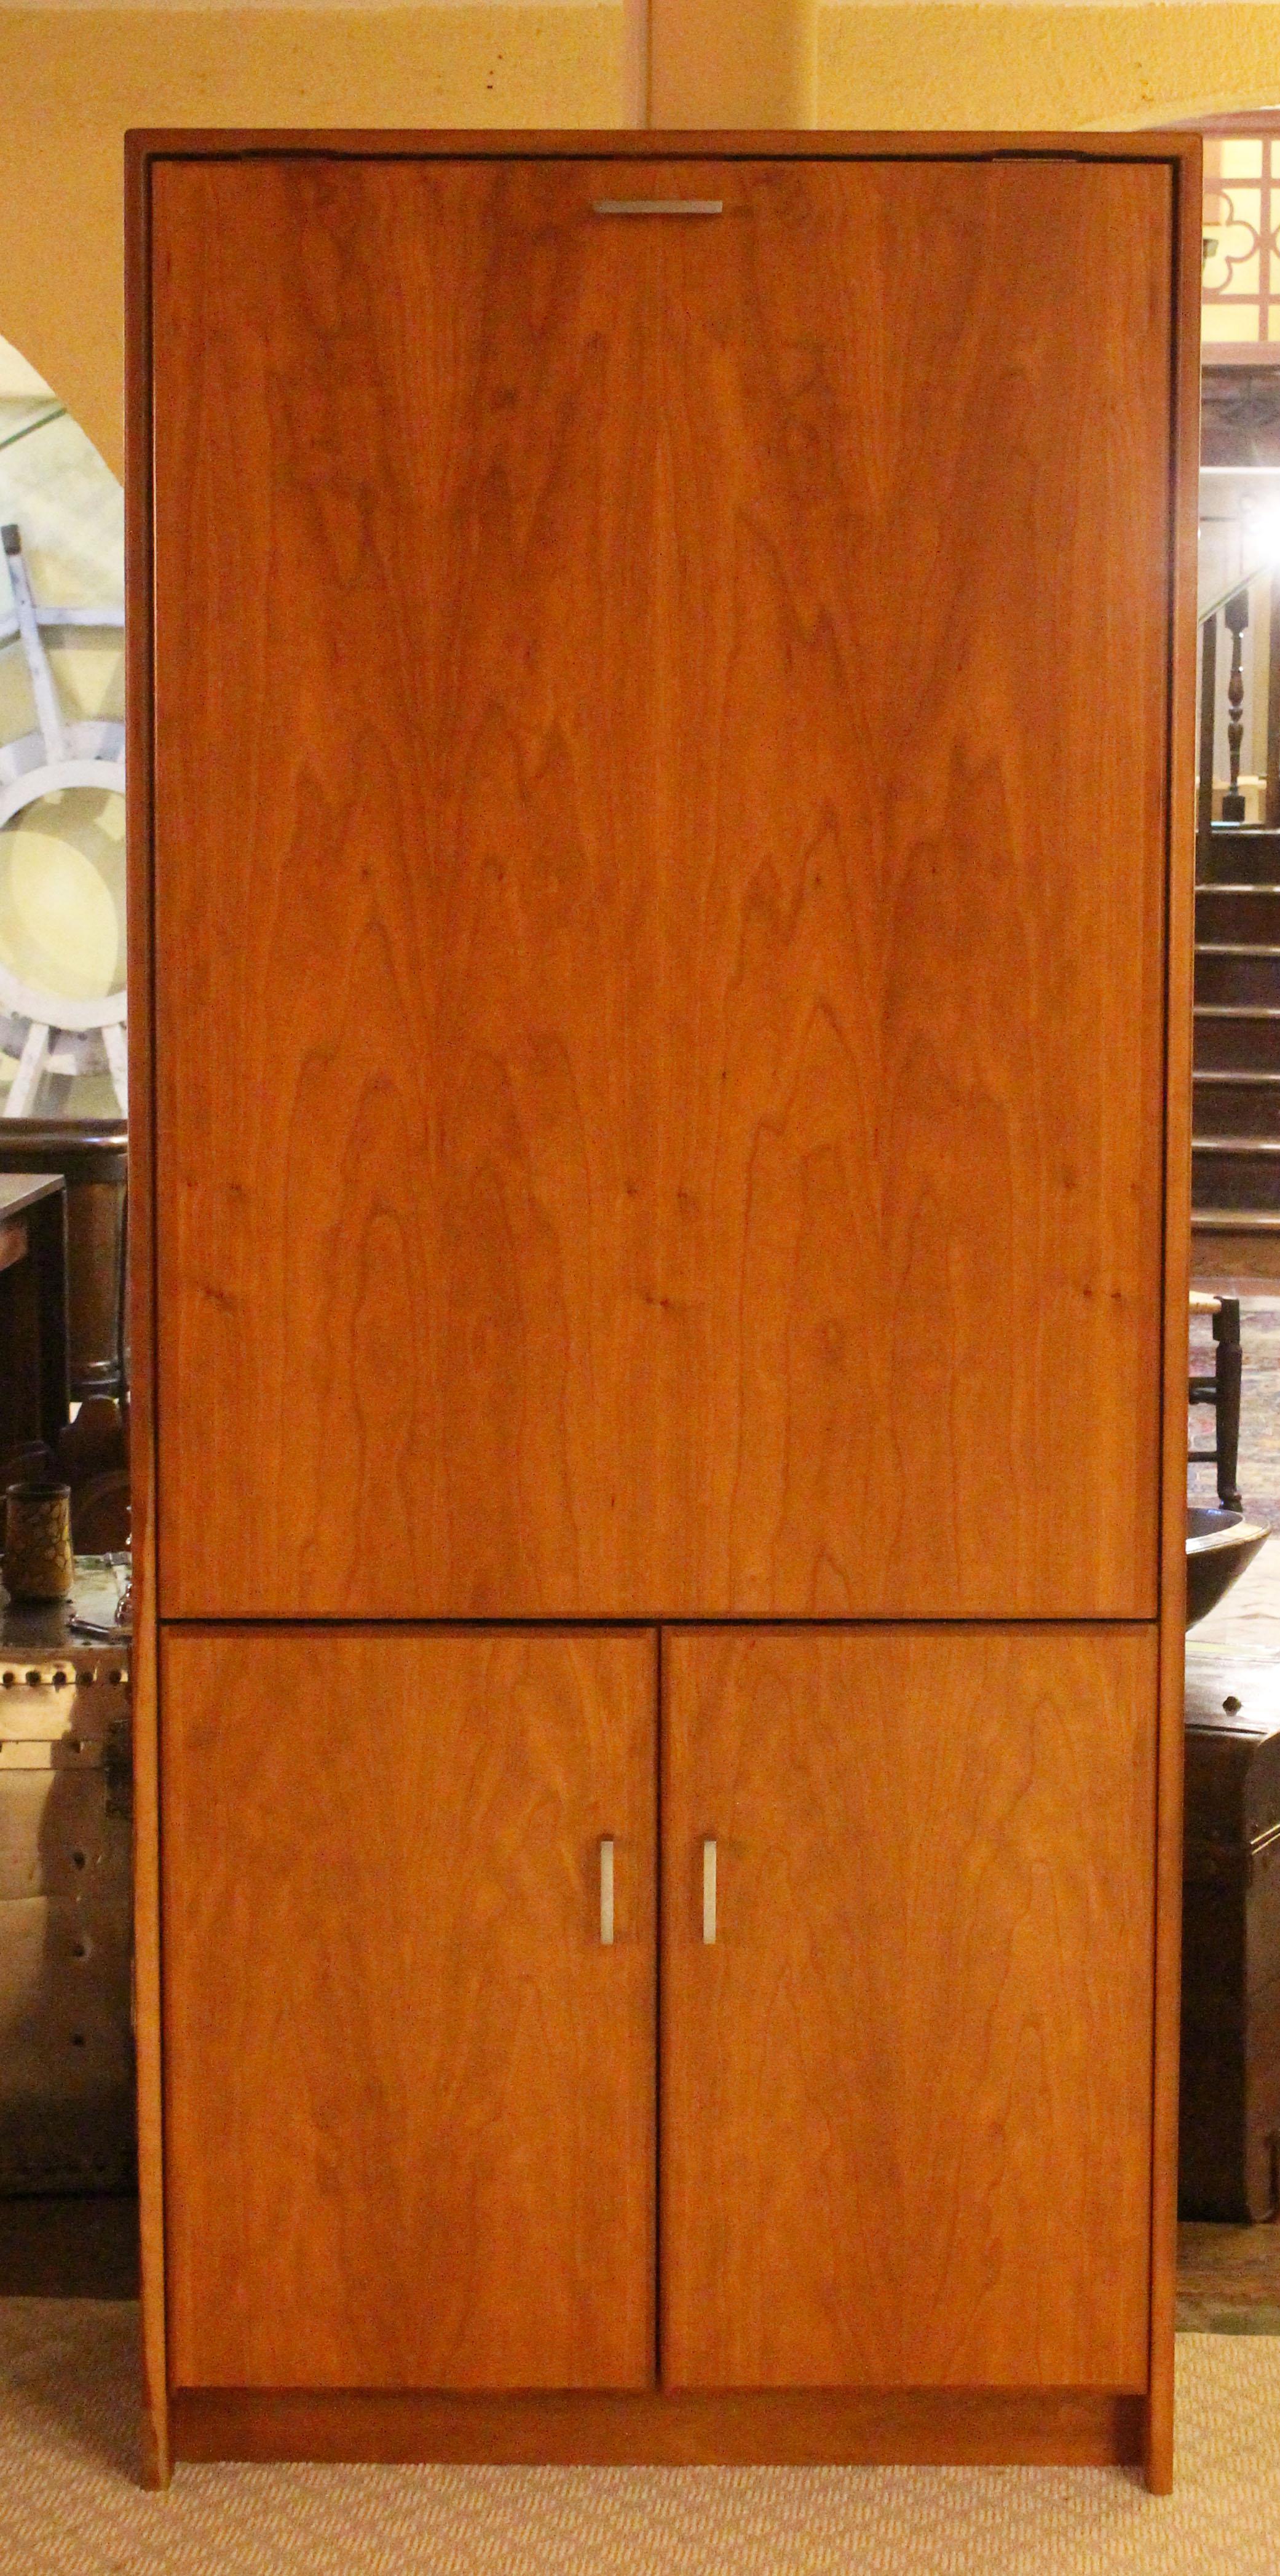 A Danish mid century modern cabinet with fold-out table, c.1960s-70s. Cherry with heartwood. Lovely figure to the doors. The upper single door opens to reveal a fold-out table and three interior 14 3/8